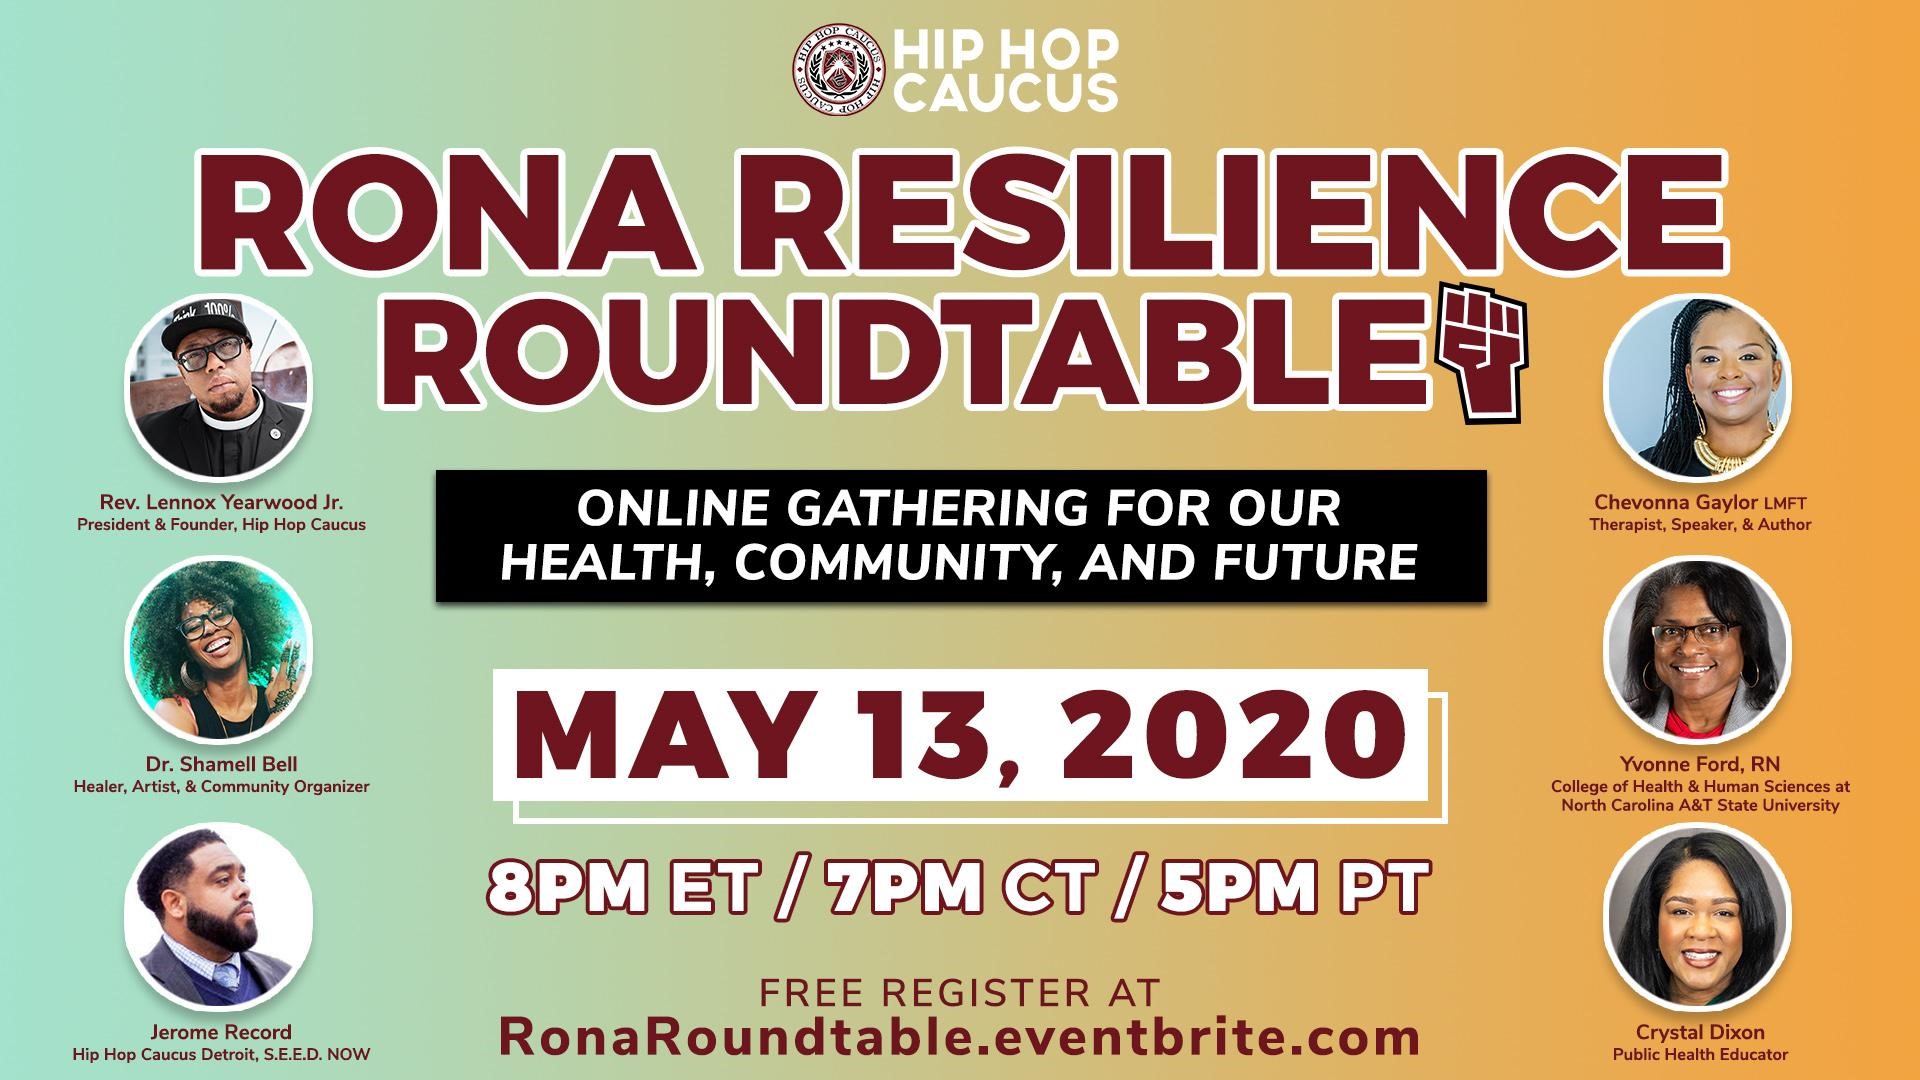 Hip Hop Caucus Rona Resilience Roundtable